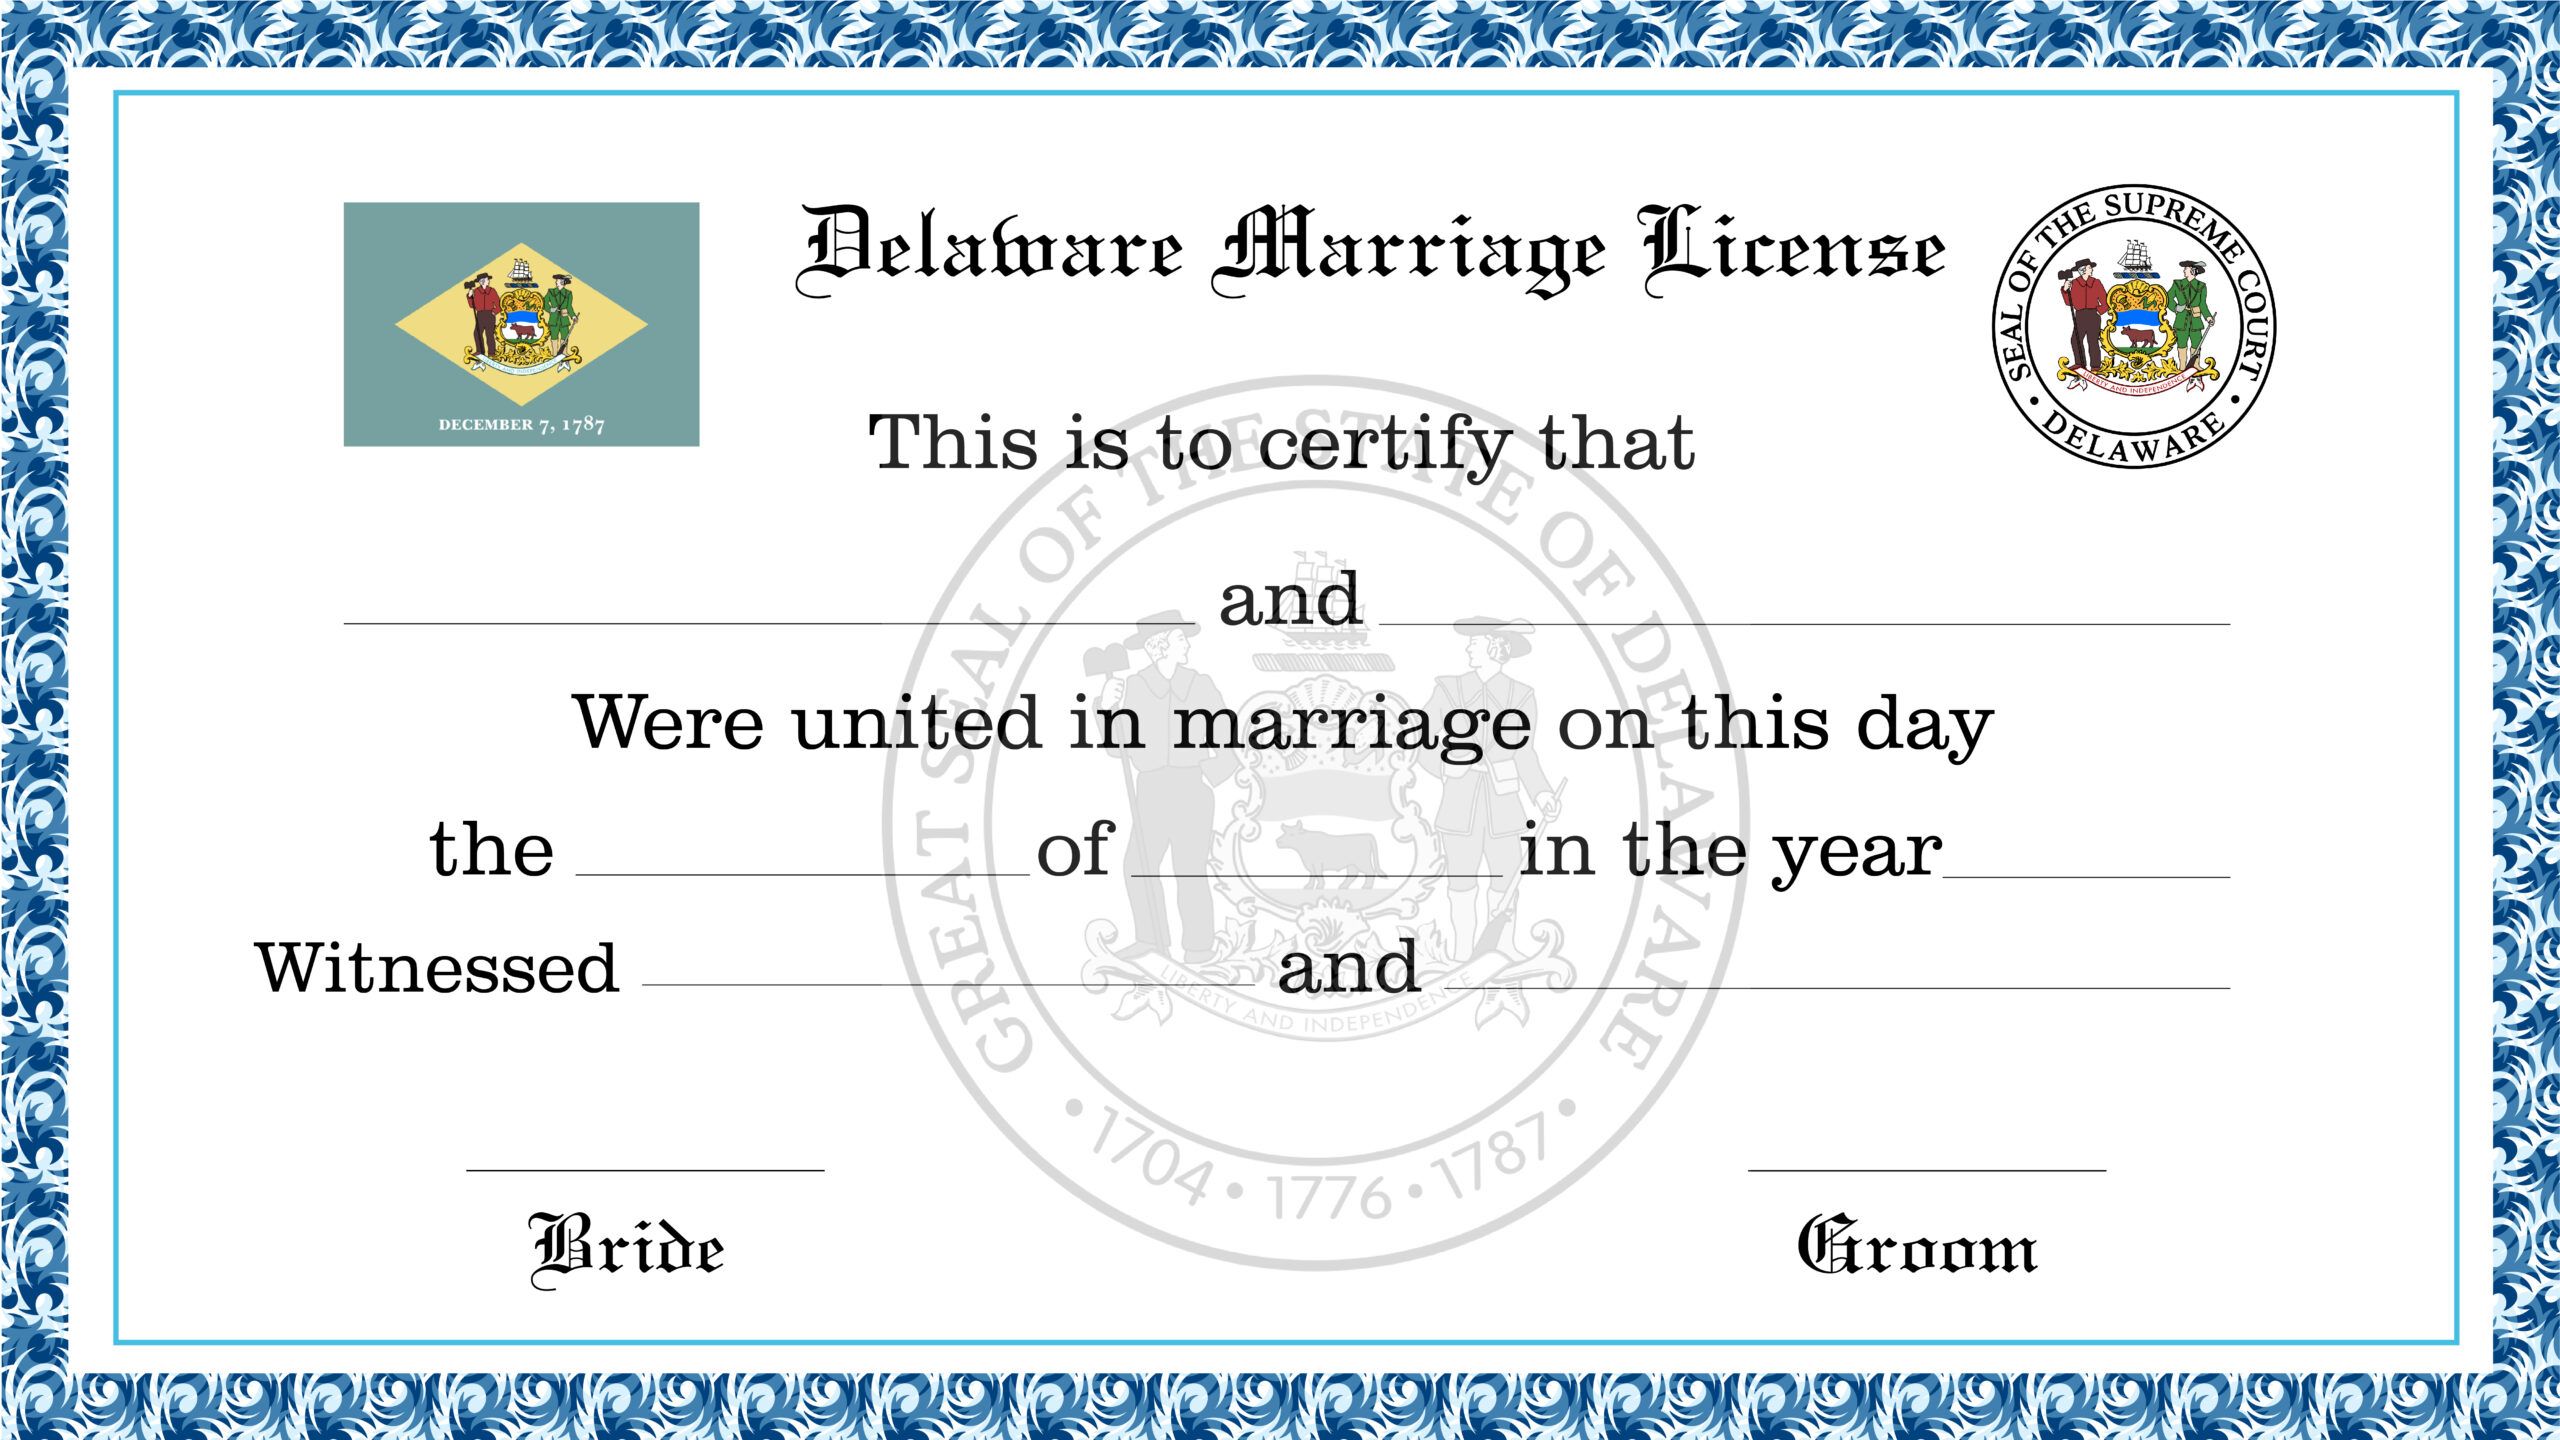 Delaware Marriage License Scaled 982bd7030f 